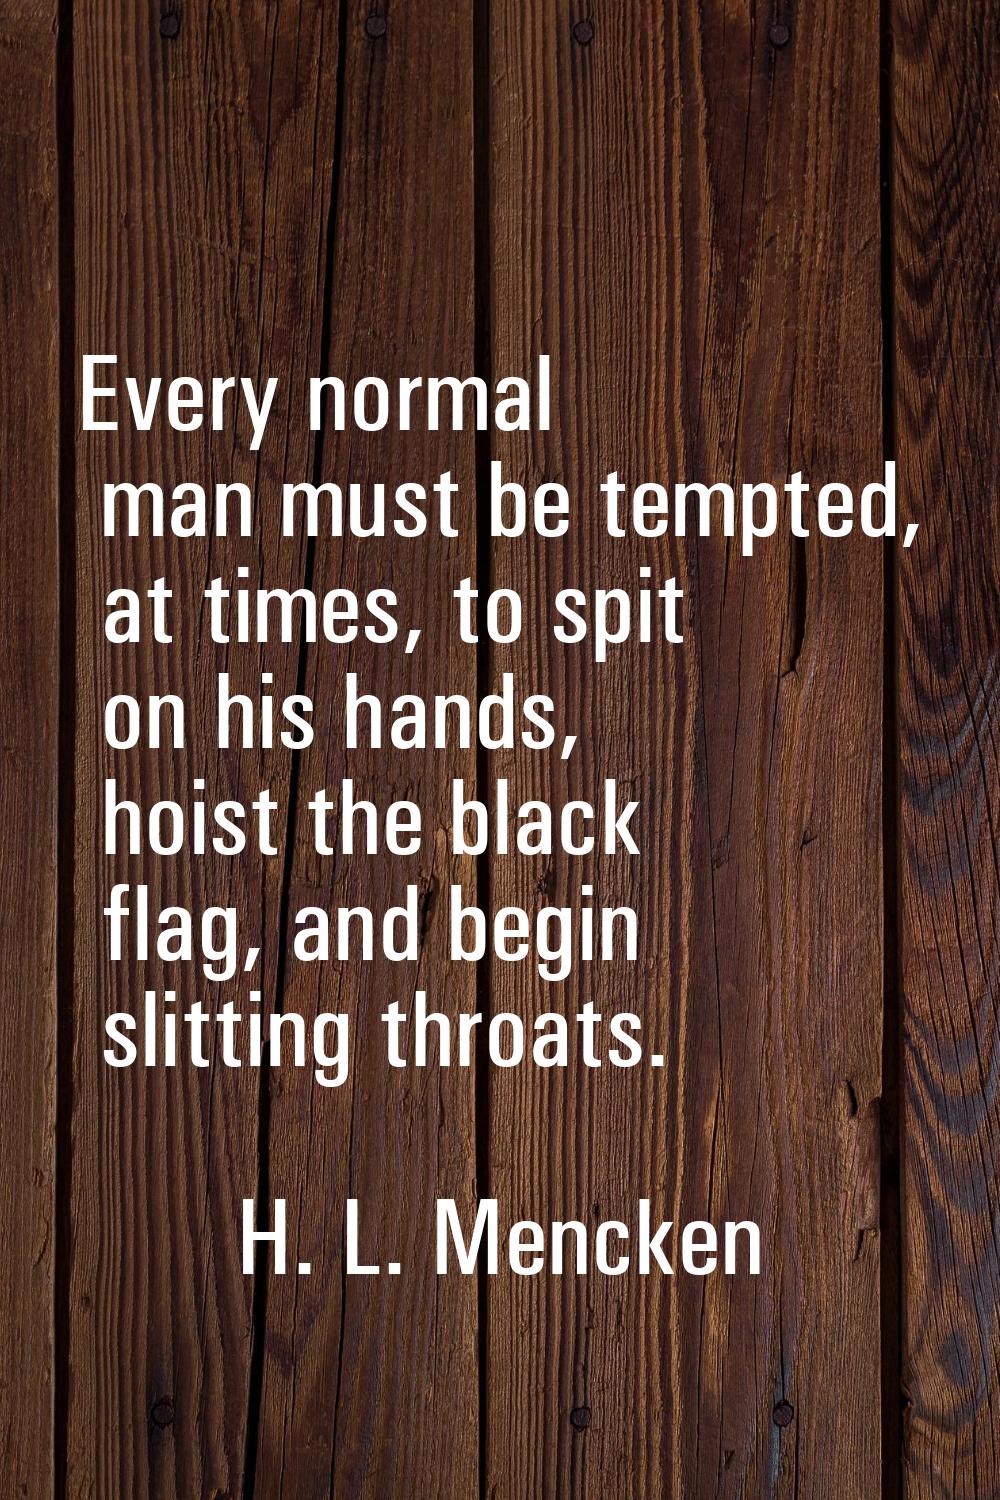 Every normal man must be tempted, at times, to spit on his hands, hoist the black flag, and begin s